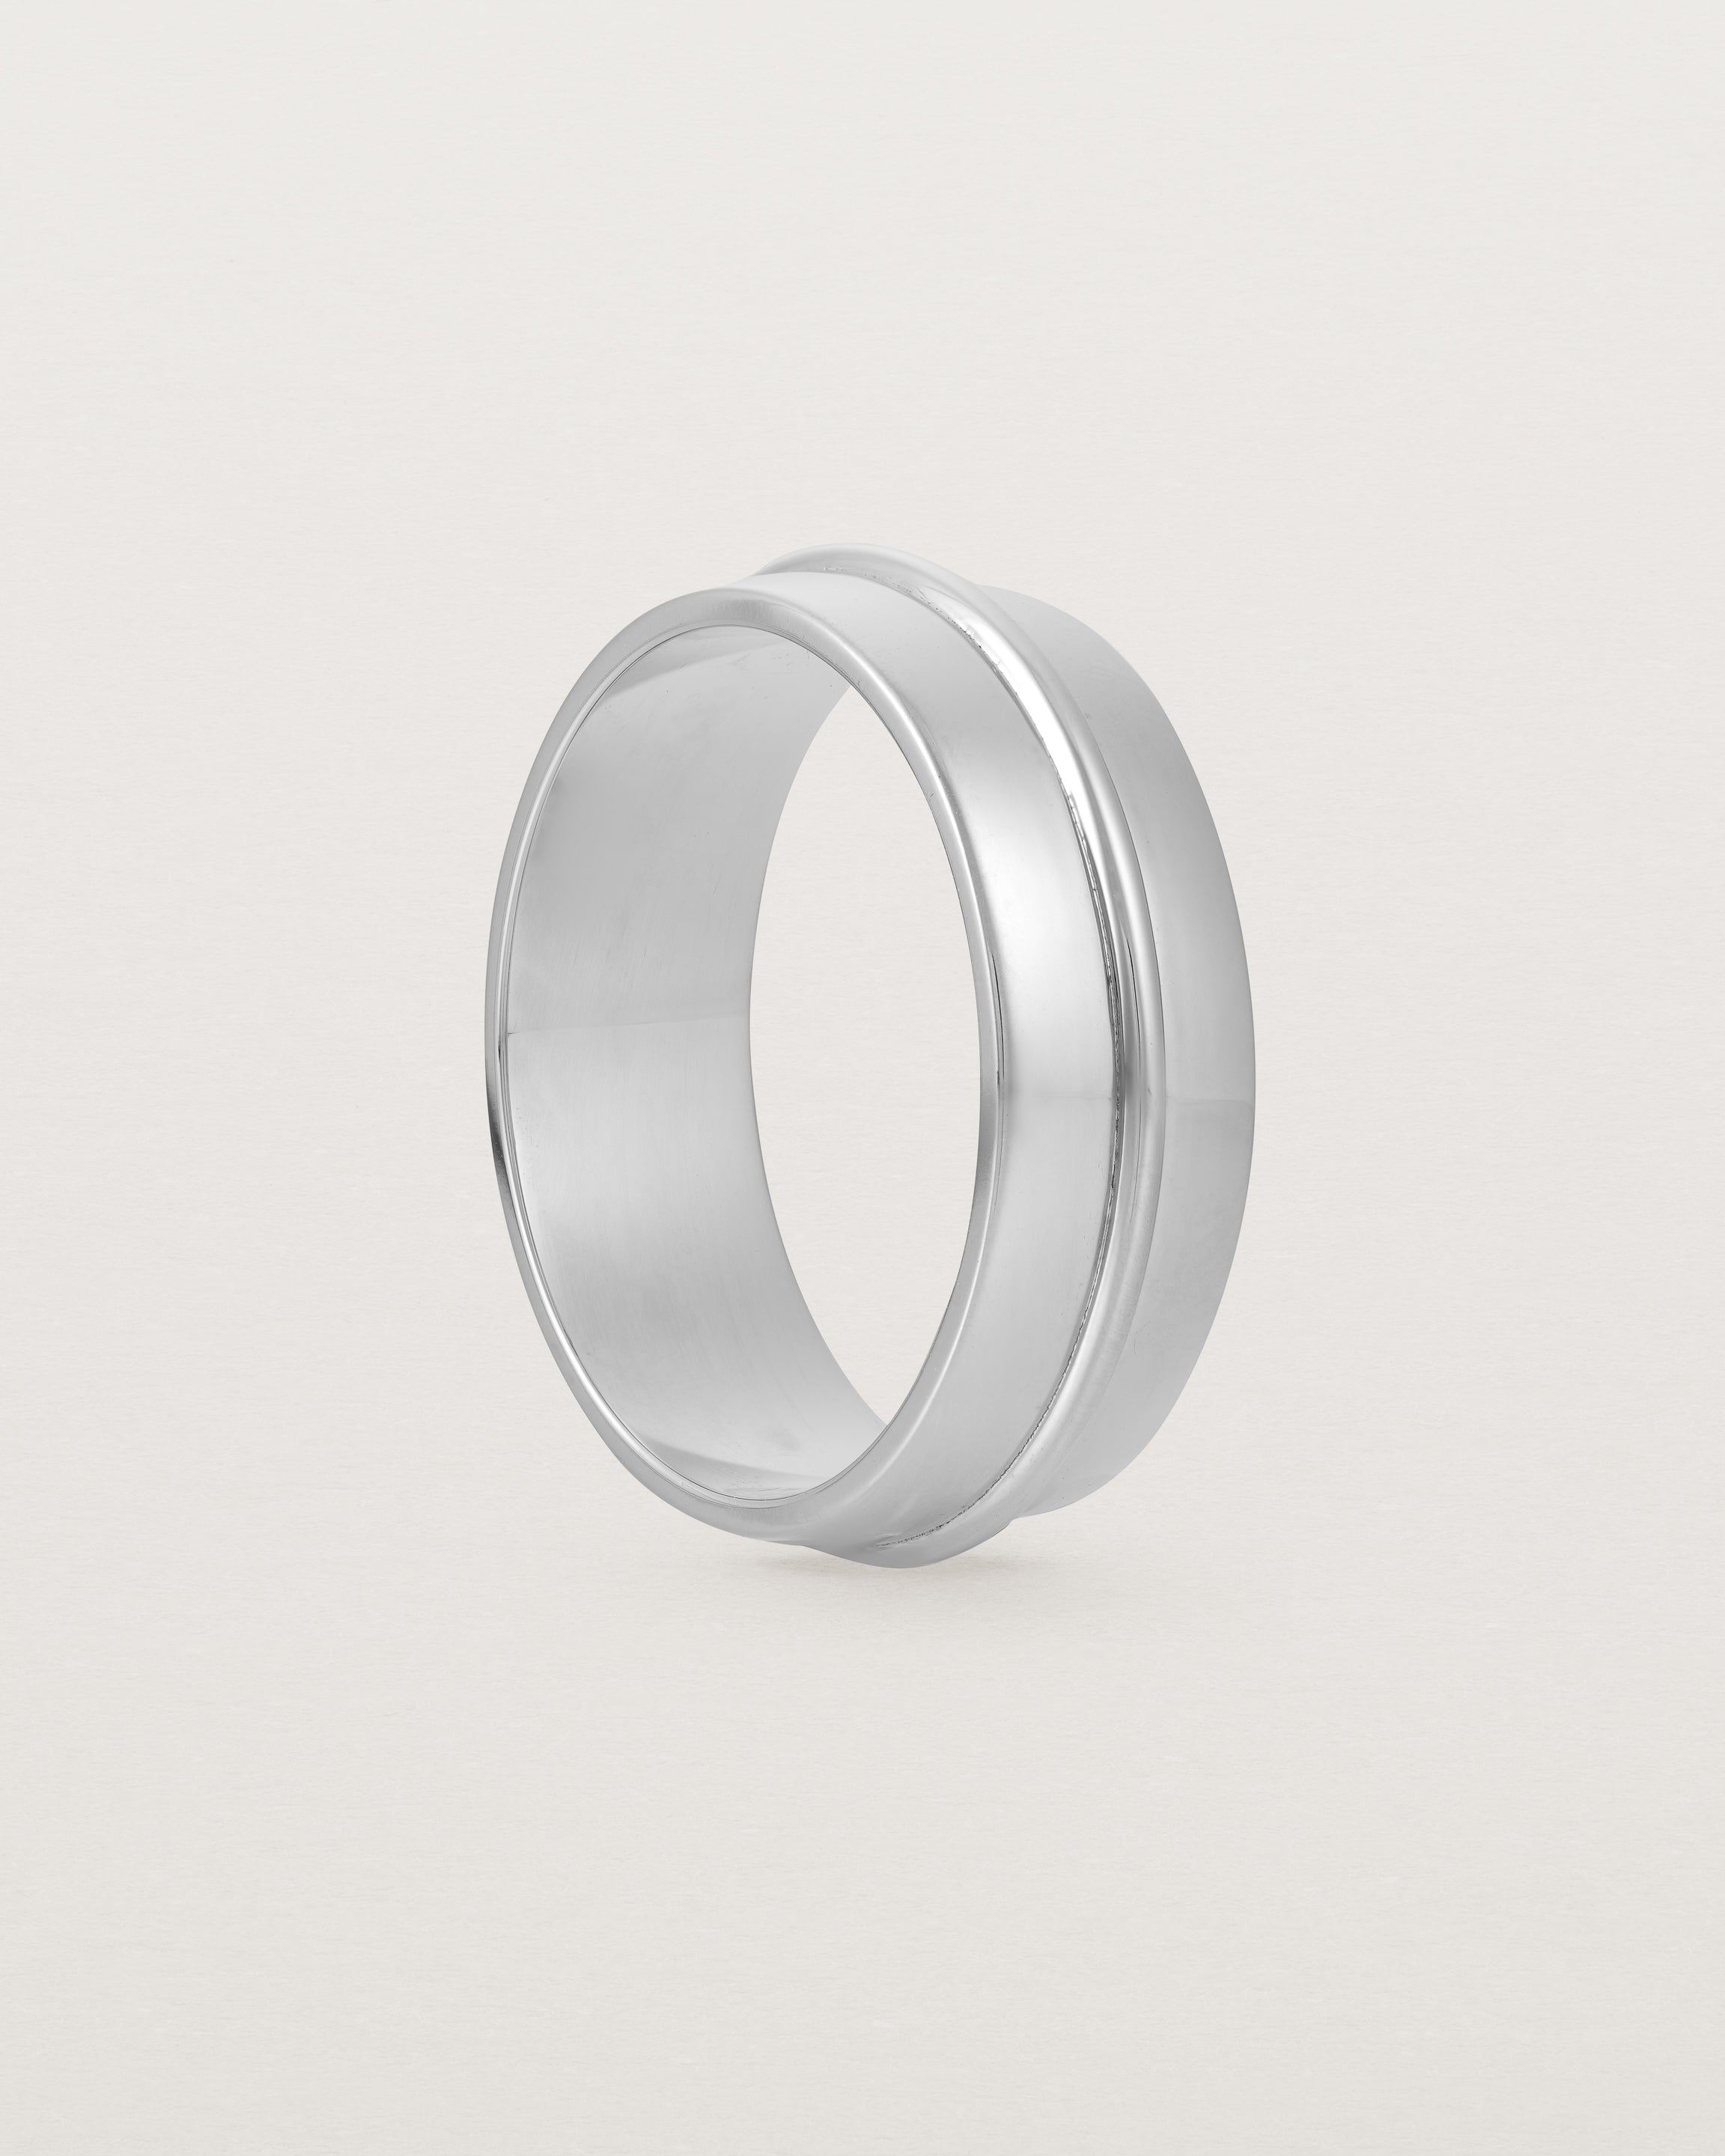 Standing view of the Seam Wedding Ring | 7mm | White Gold.